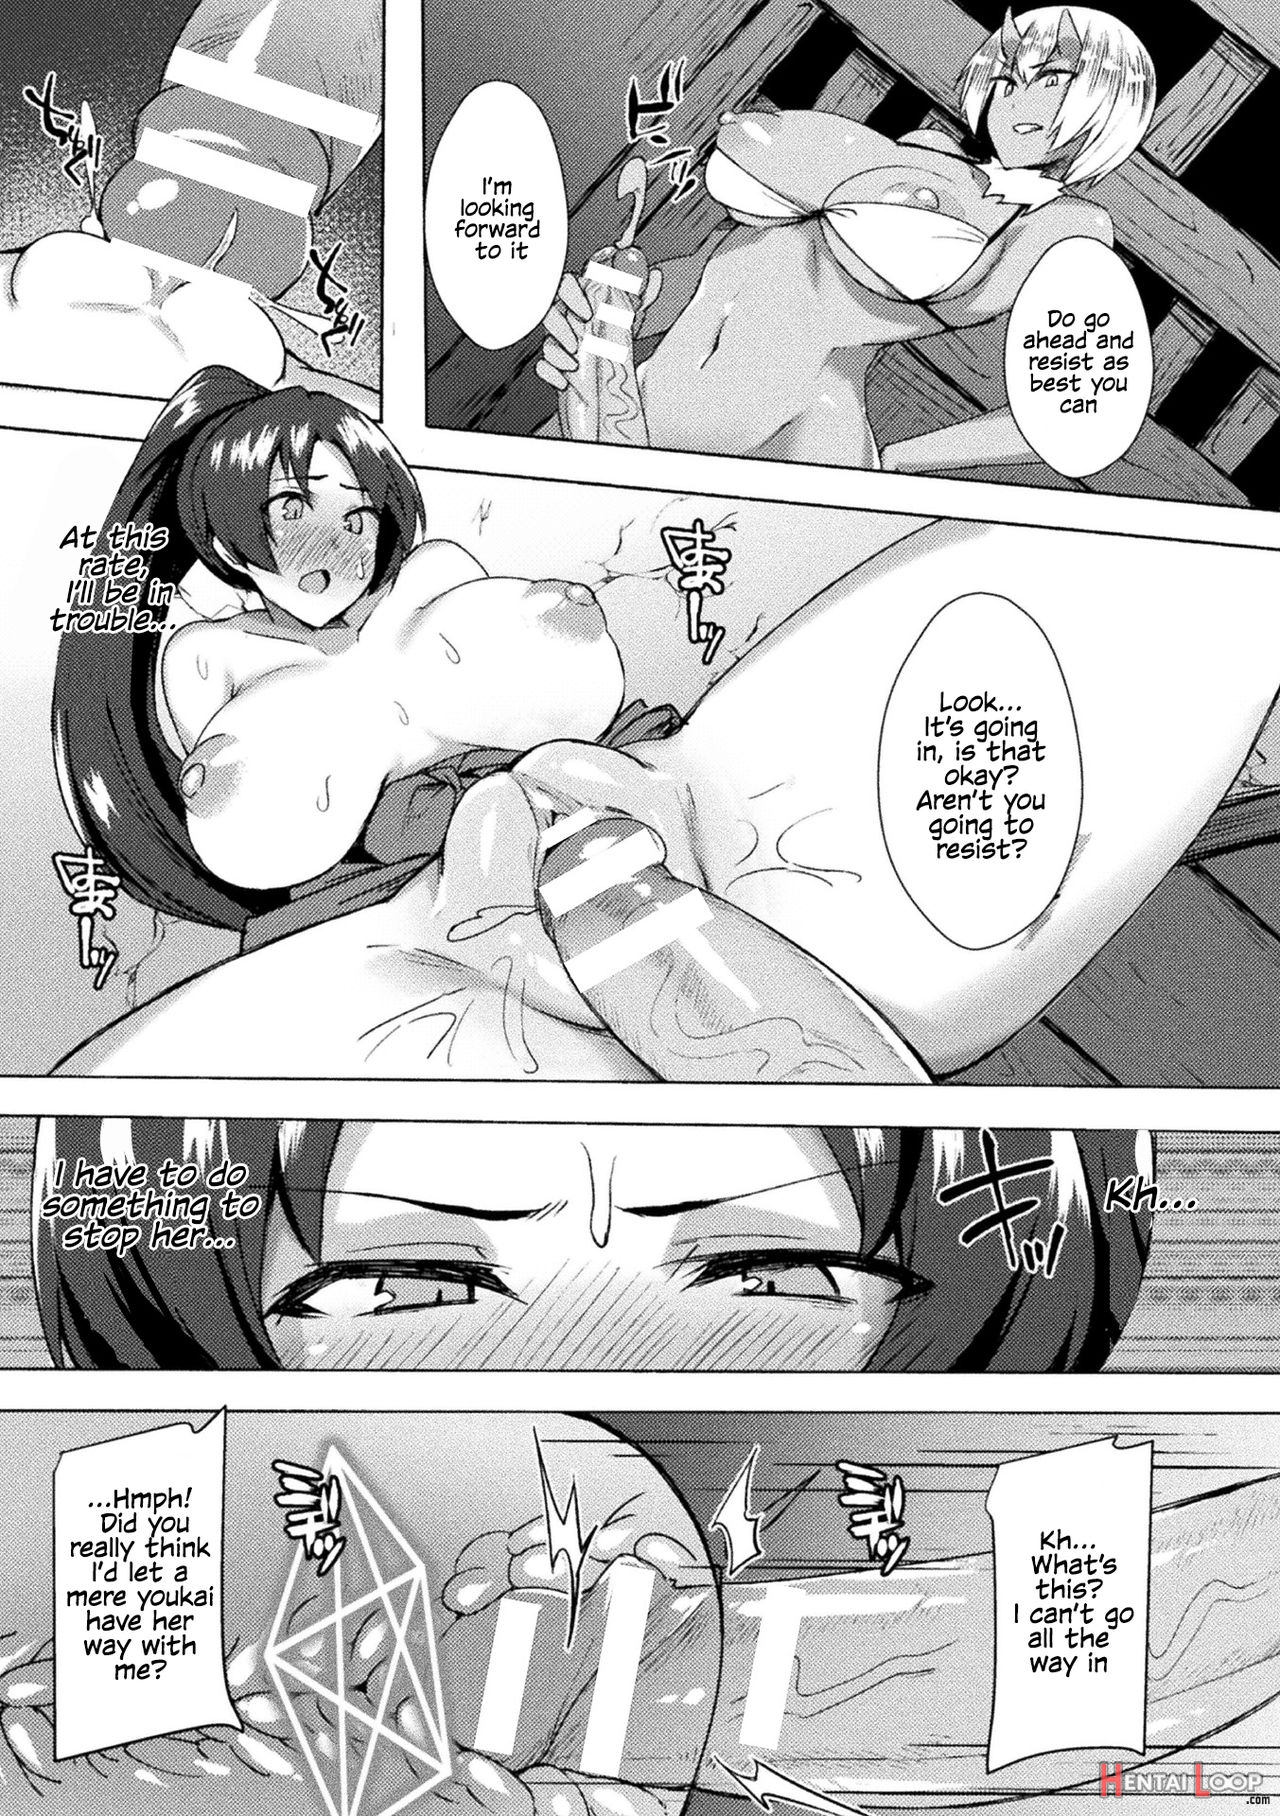 Futanari Girls Forcefully Impregnating Others With A Mating Press! Vol. 1 page 27